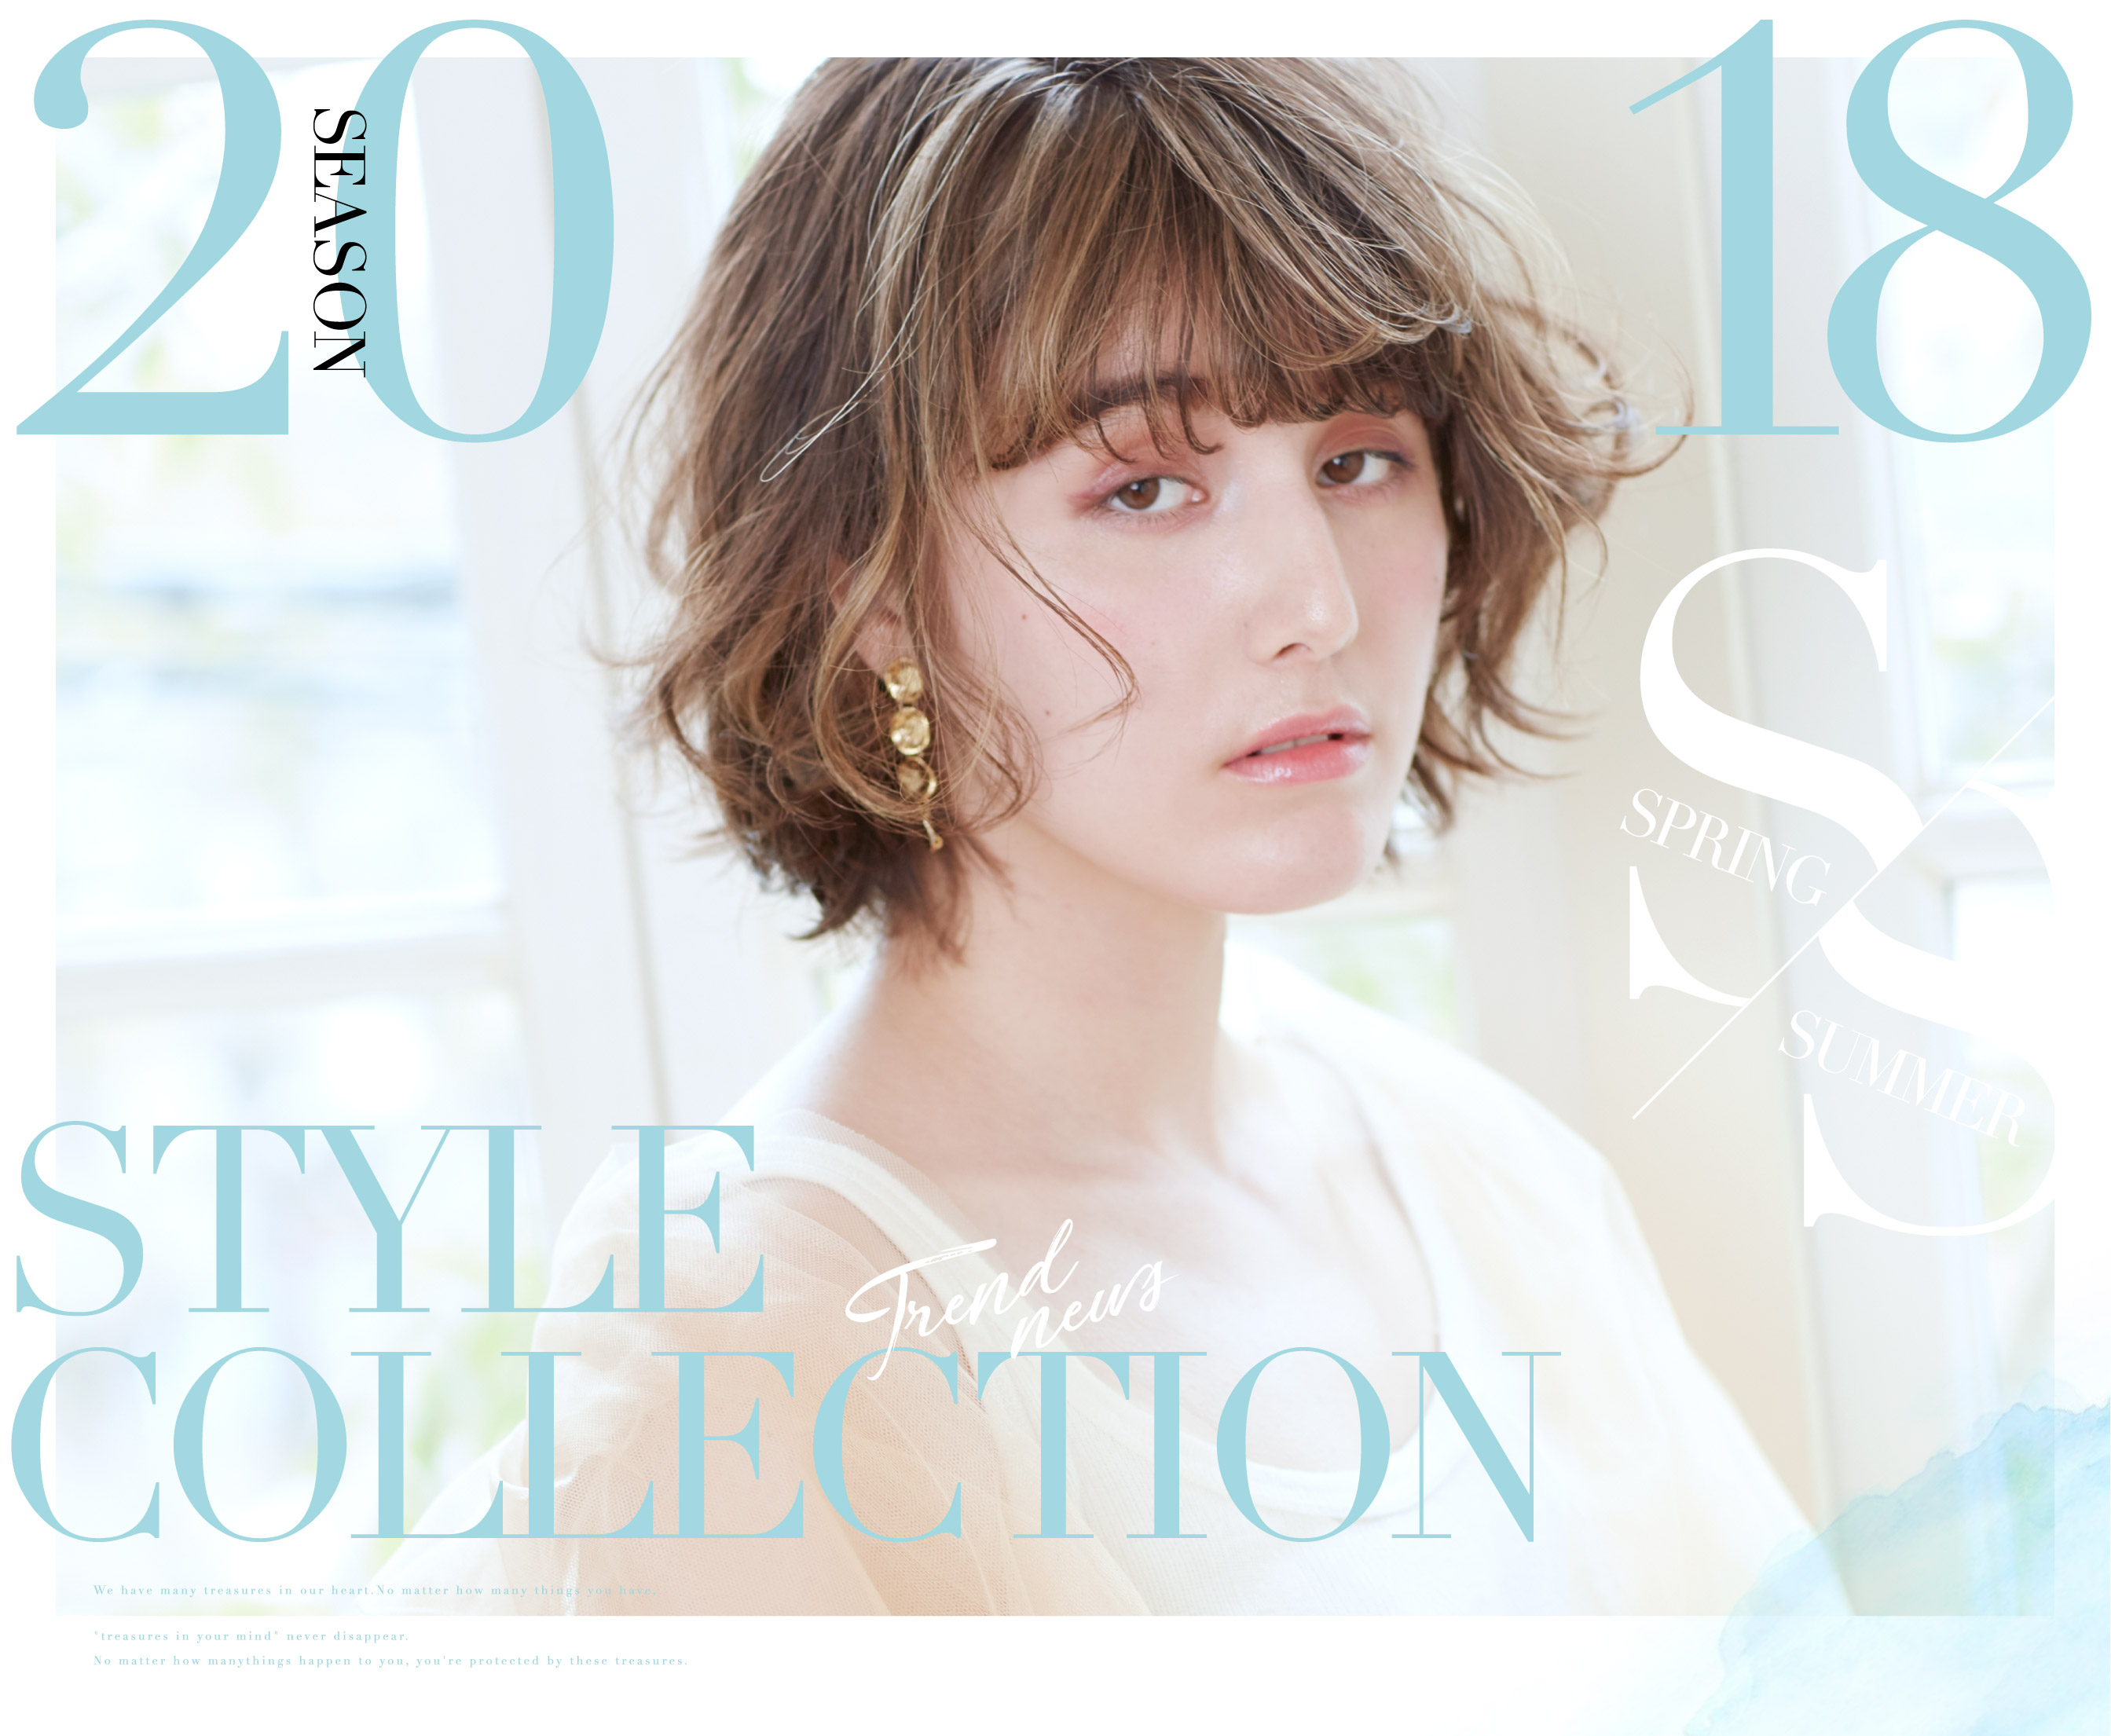 2018 ZACC STYLE COLLECTION